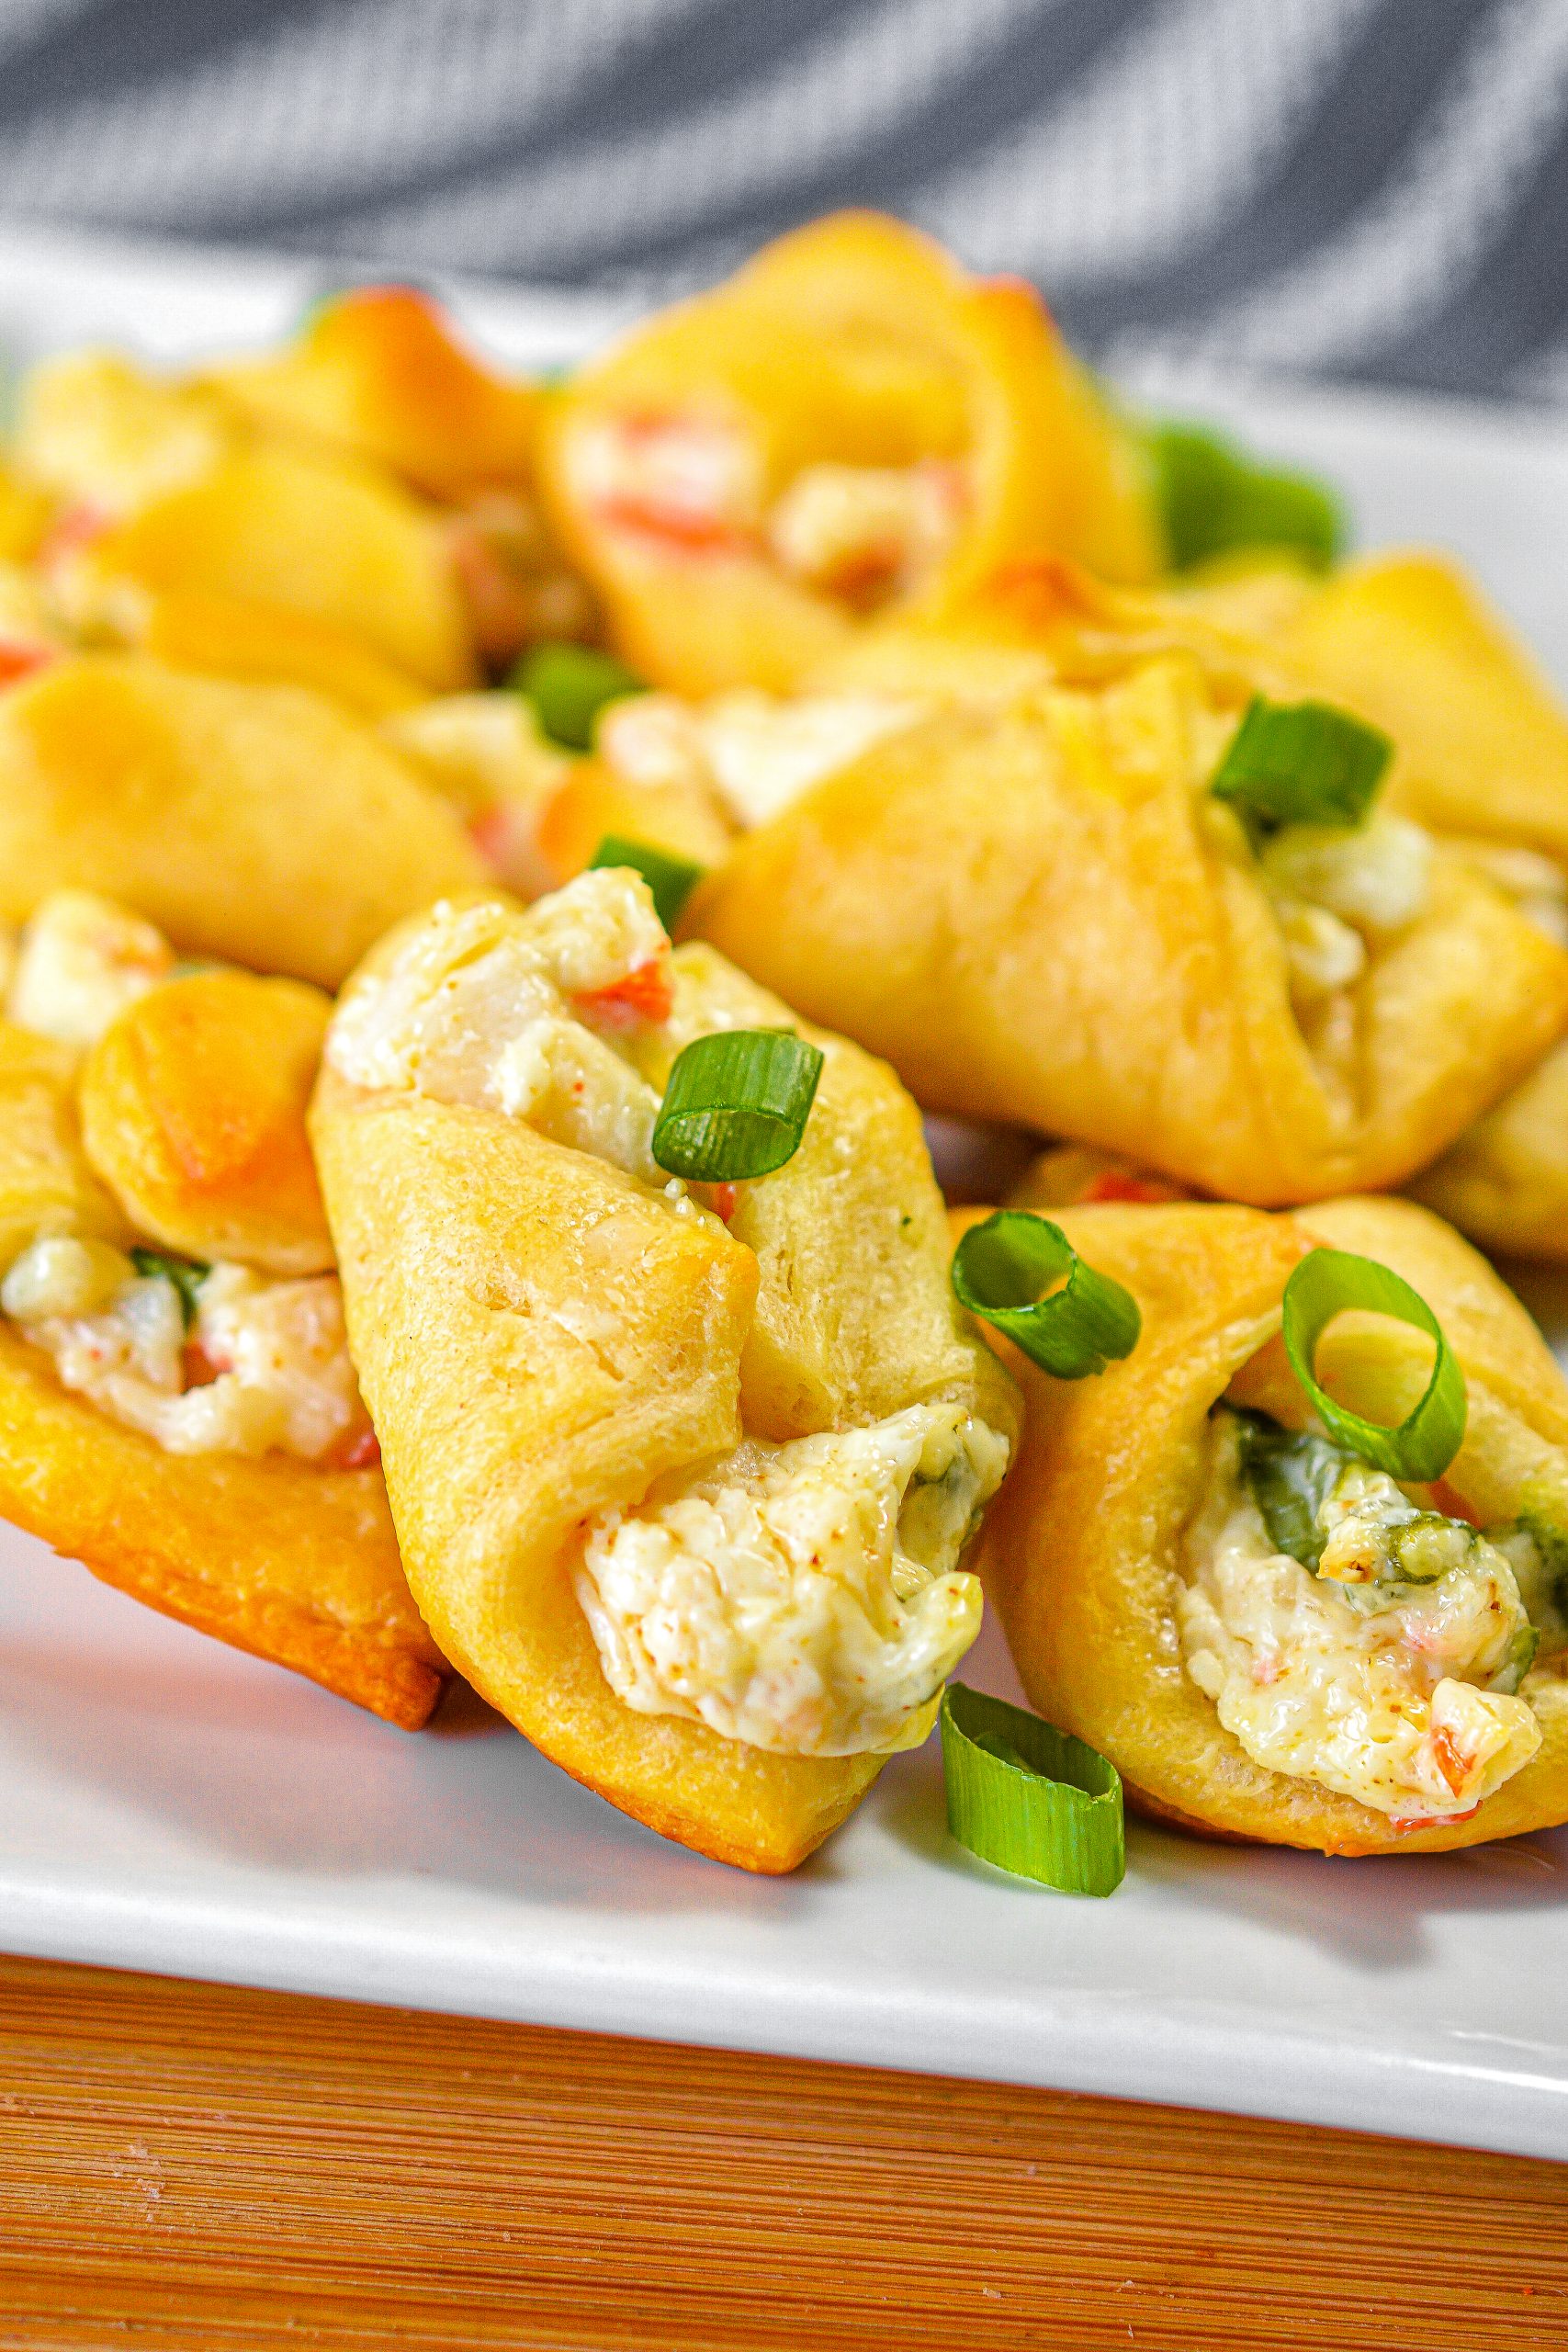 Crab and Cream Cheese Filled Crescent Rolls
